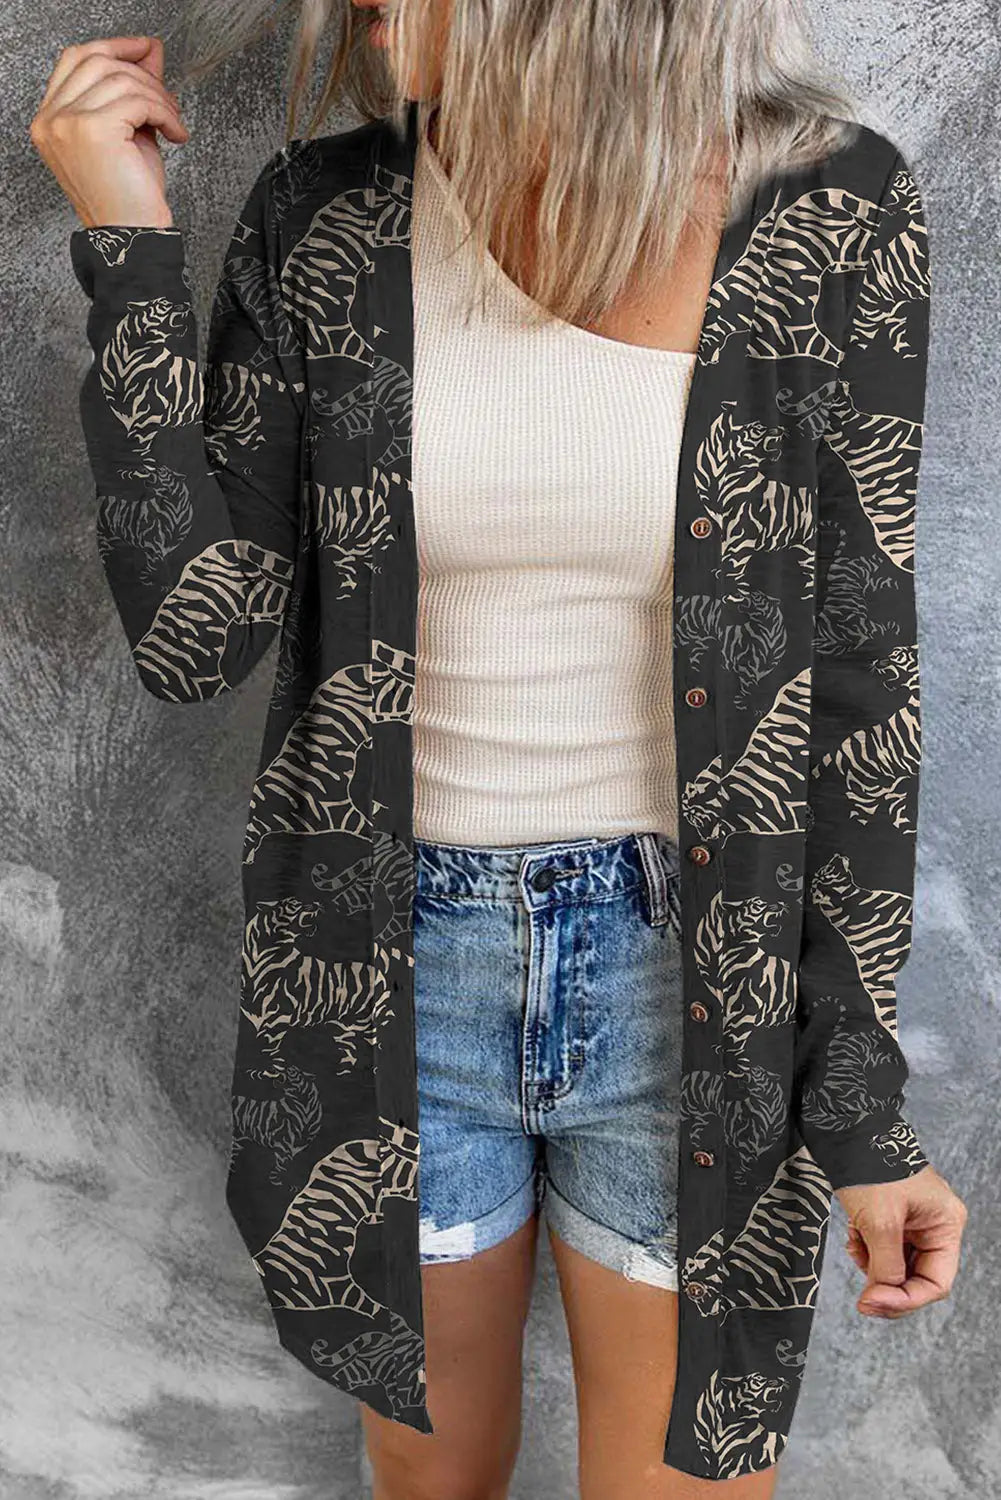 Black wild tiger print button front cardigan - s / 80% cotton + 20% polyester - sweaters & cardigans